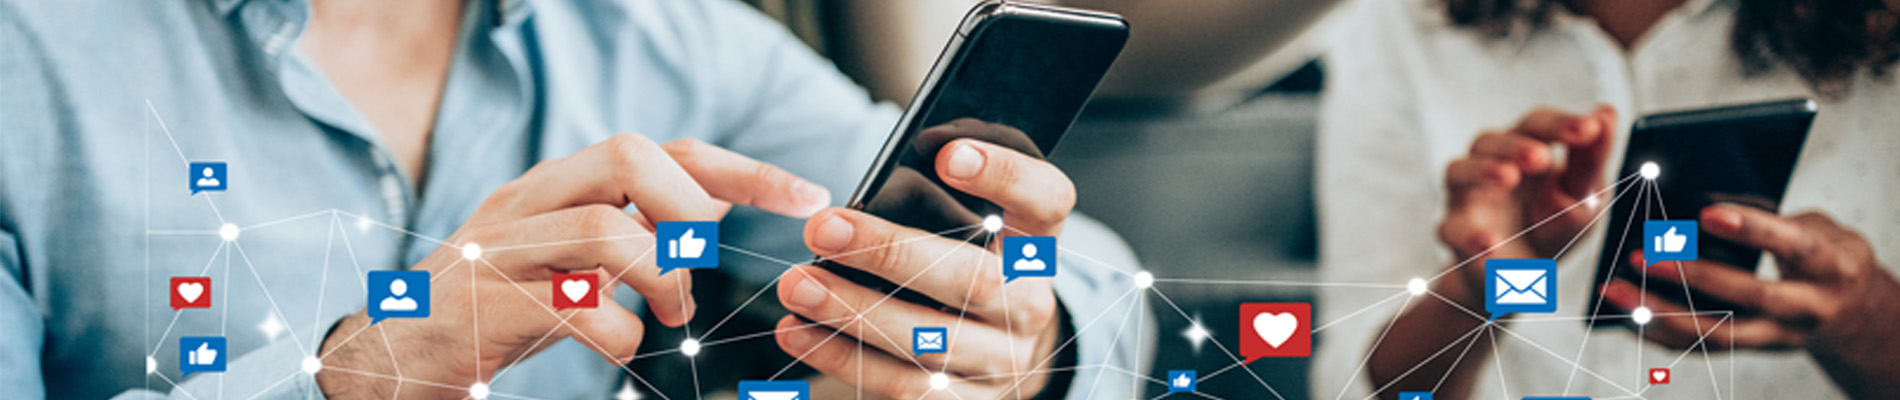 Empowering Connections: How Social Media Redefines : Telecom Marketing